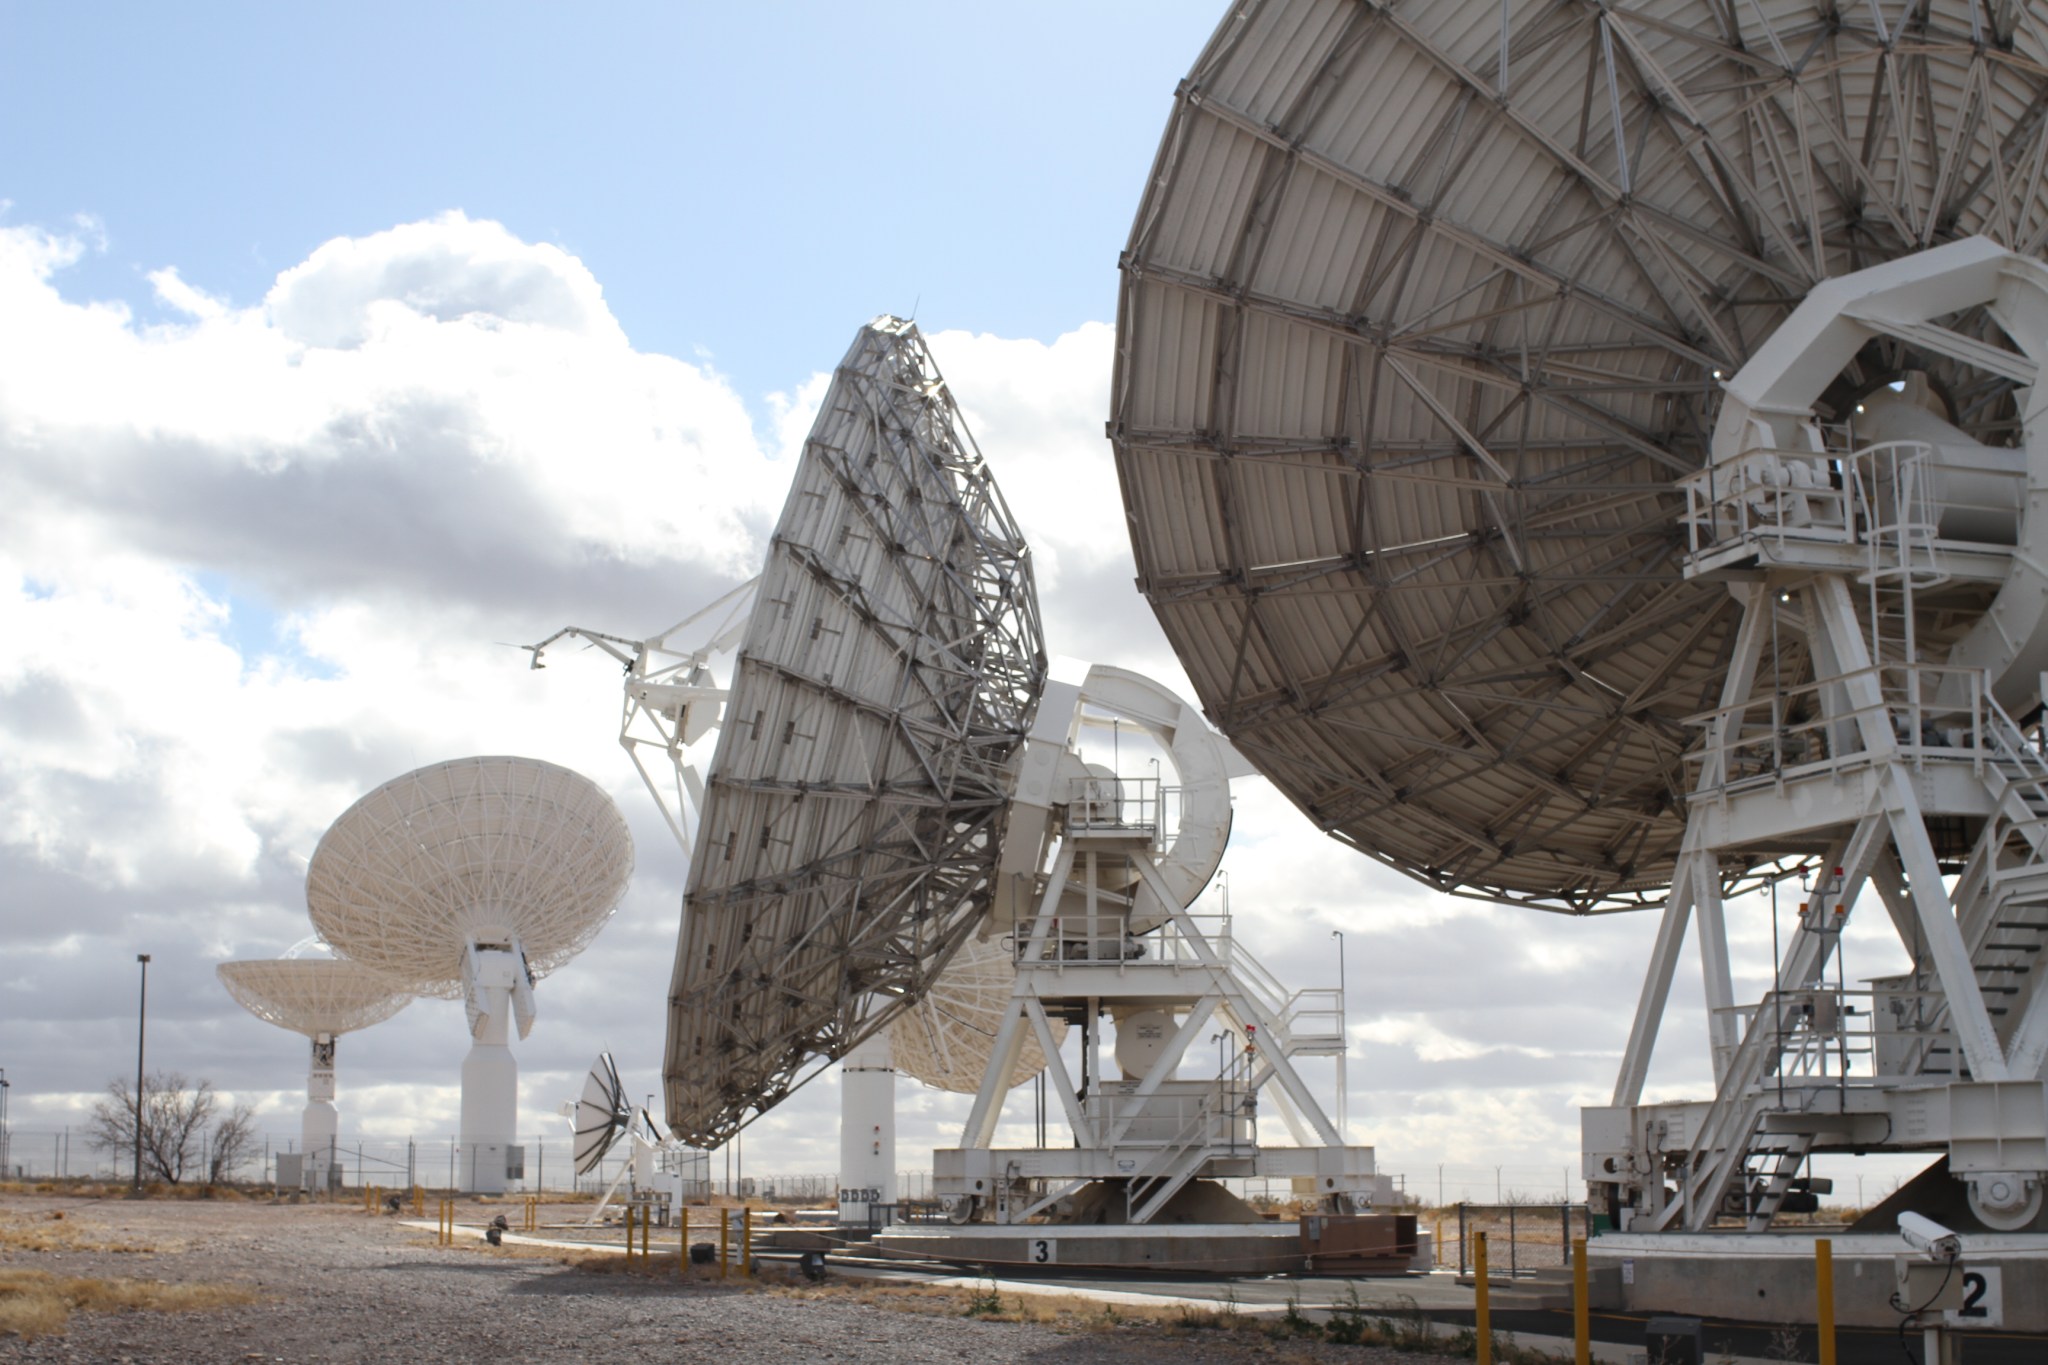 Antennas in the foreground at NASA's White Sand Complex.